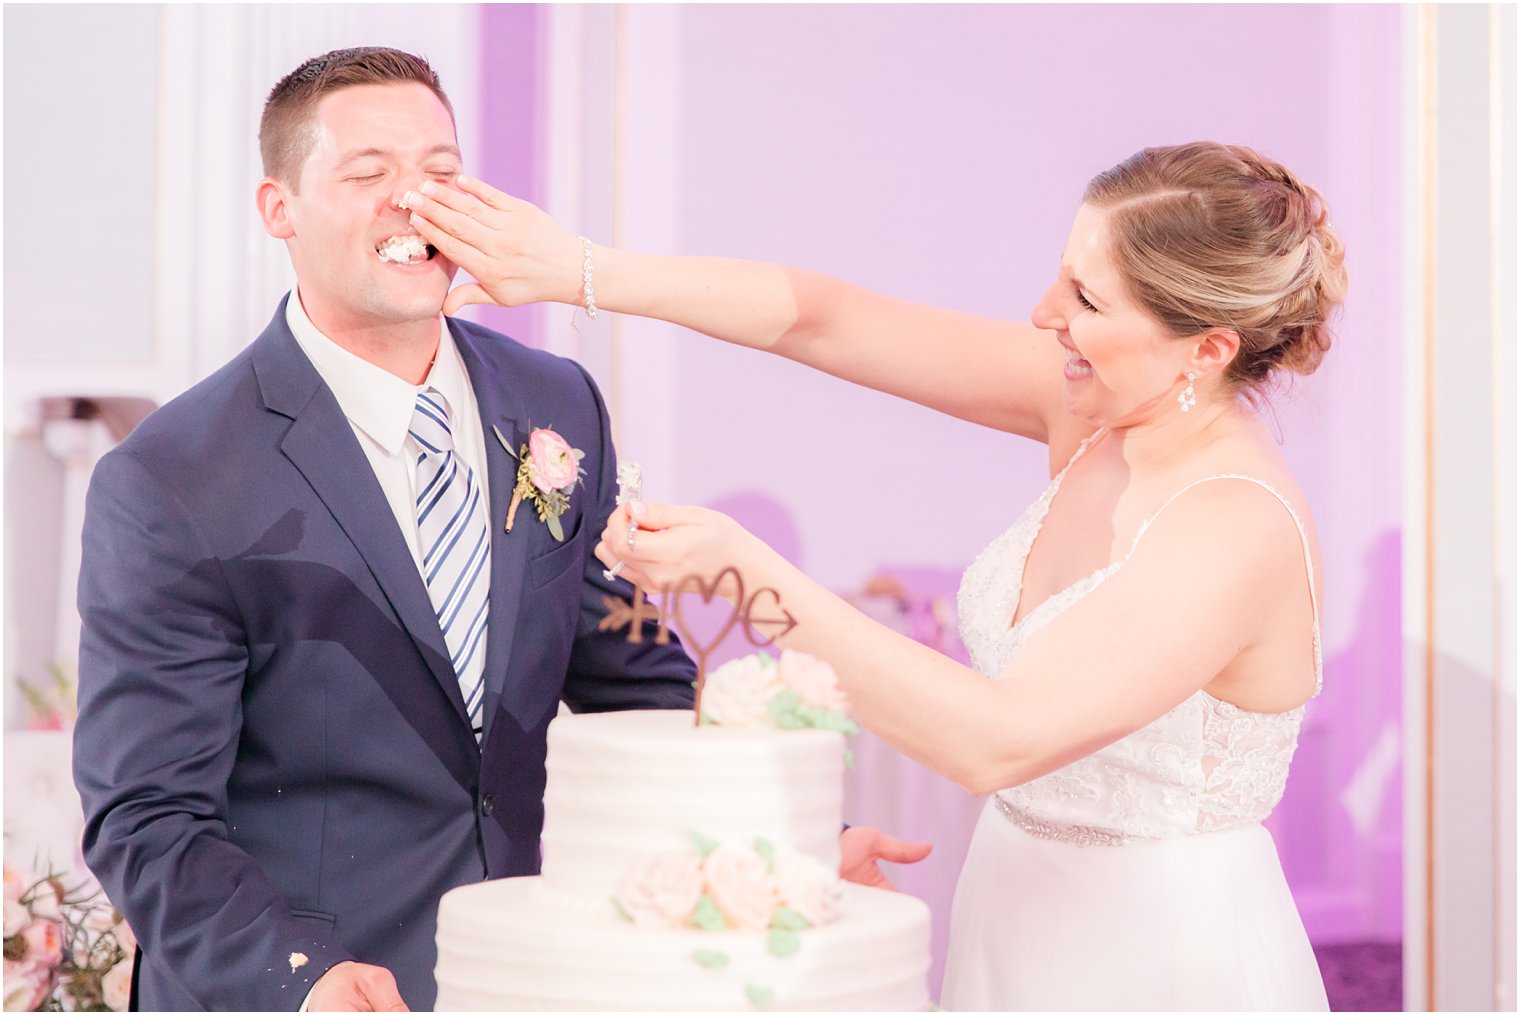 Bride and groom cutting cake during wedding reception at The Mill at Lakeside Manor in Spring Lake NJ